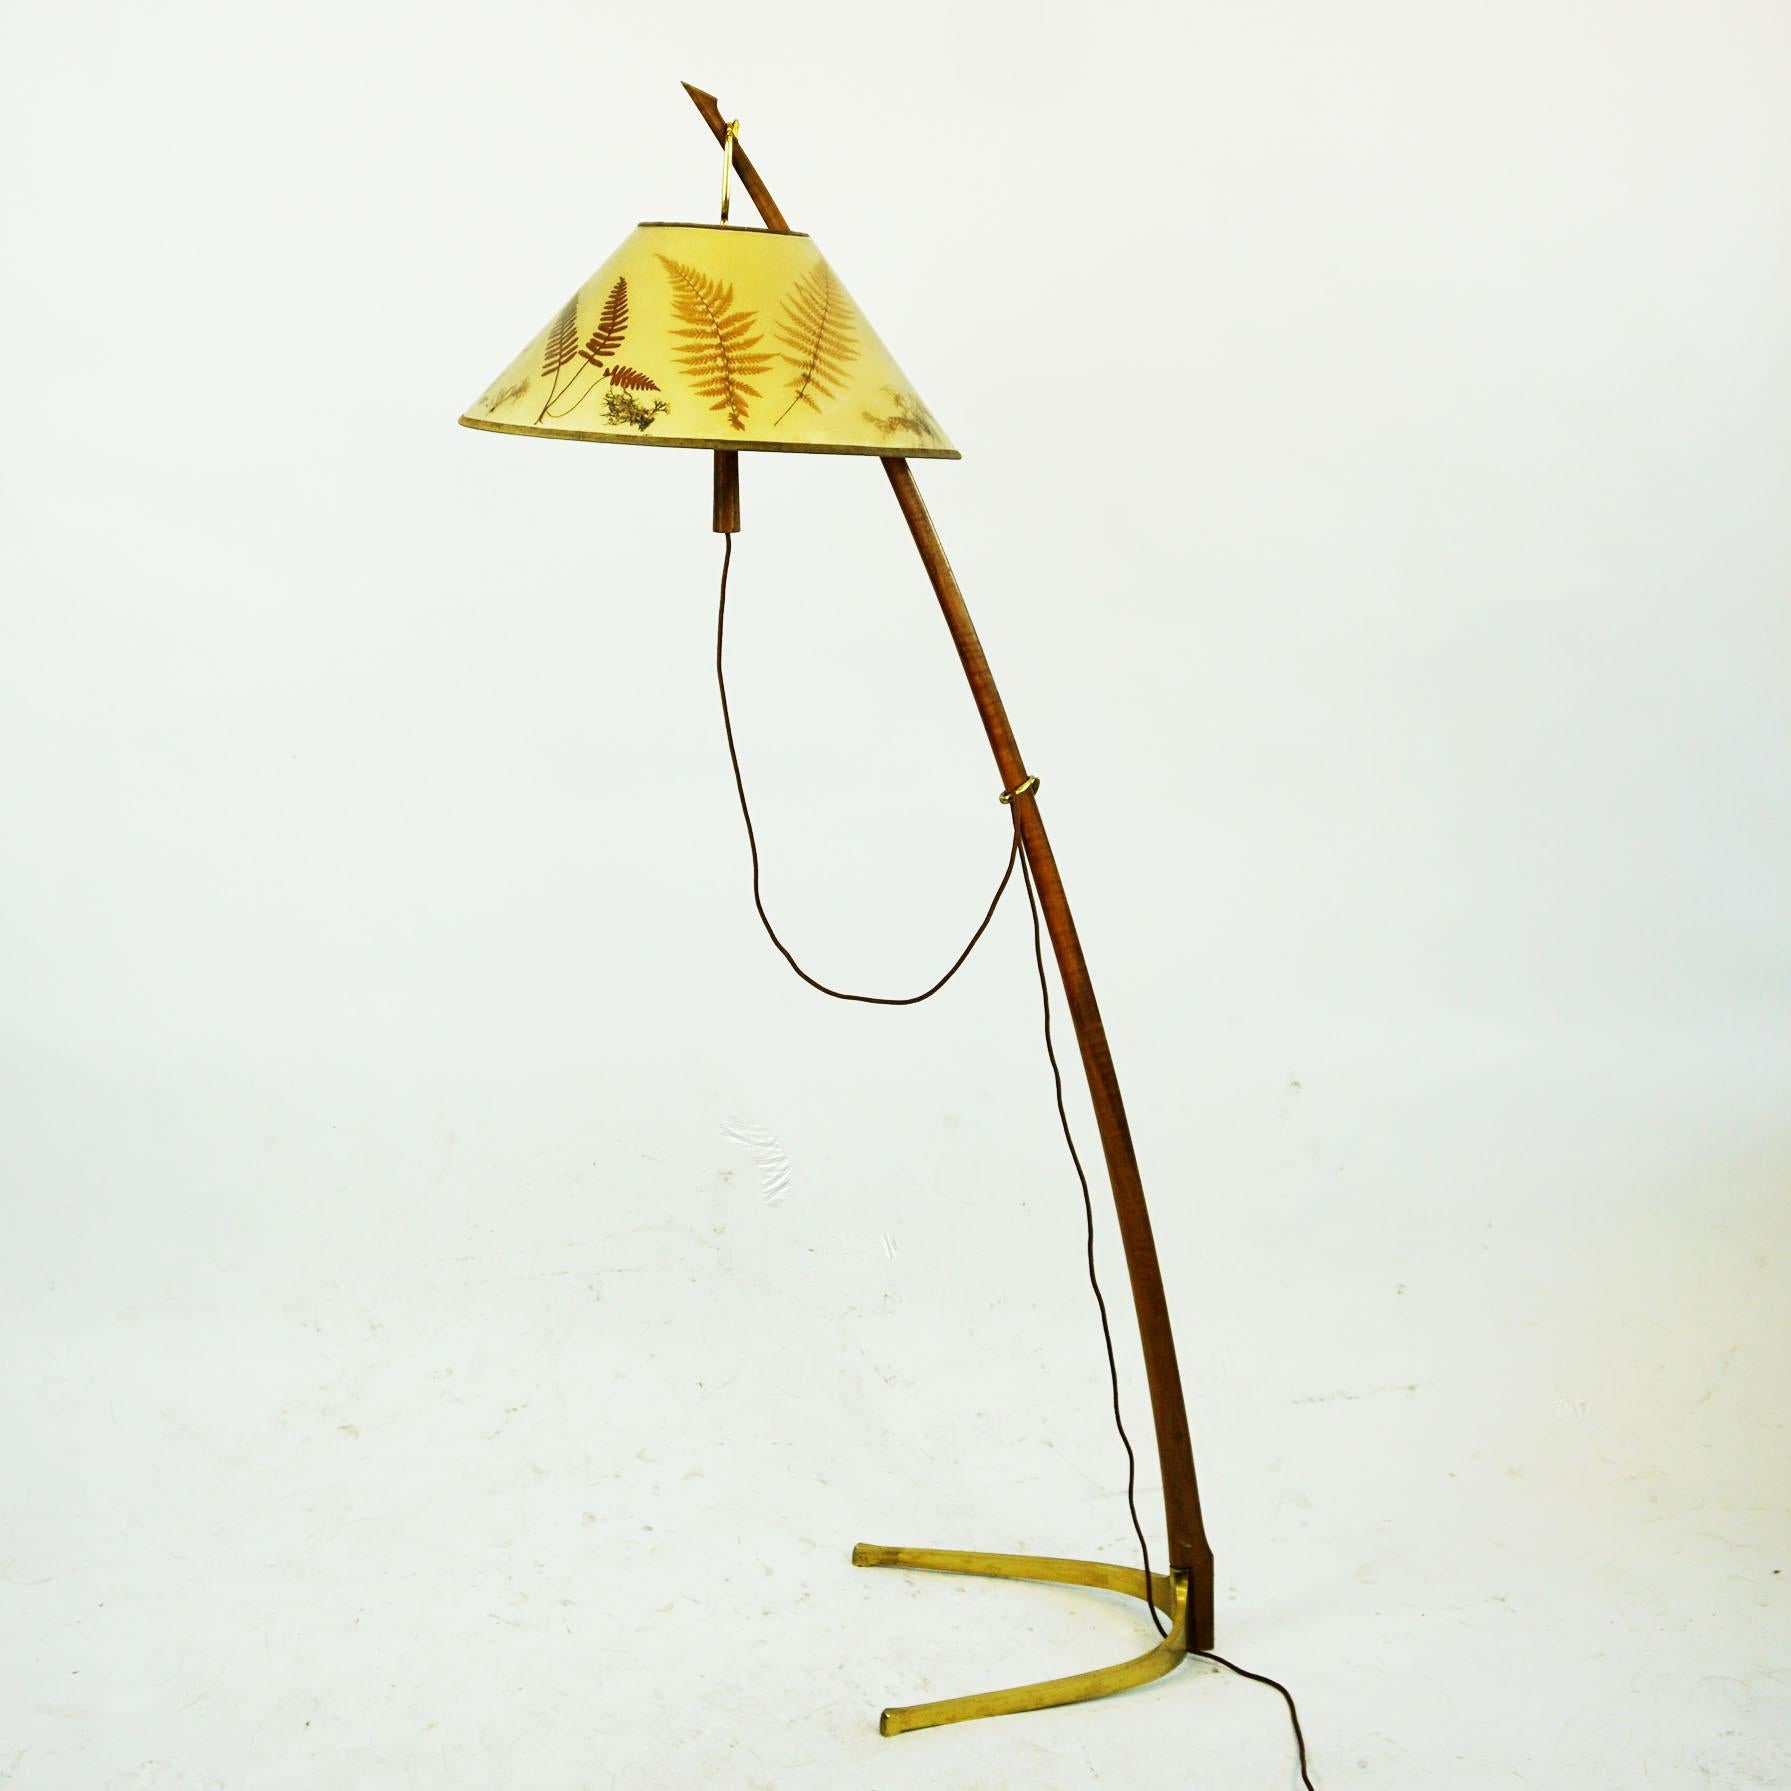 This beautiful Austrian midcentury Dornstab - thorn stick - floor lamp, was designed in 1947 and produced by J.T. Kalmar Vienna and has the Model No. 2076. It is made out of a wooden, shaped stem with a curved brass base and the original vintage